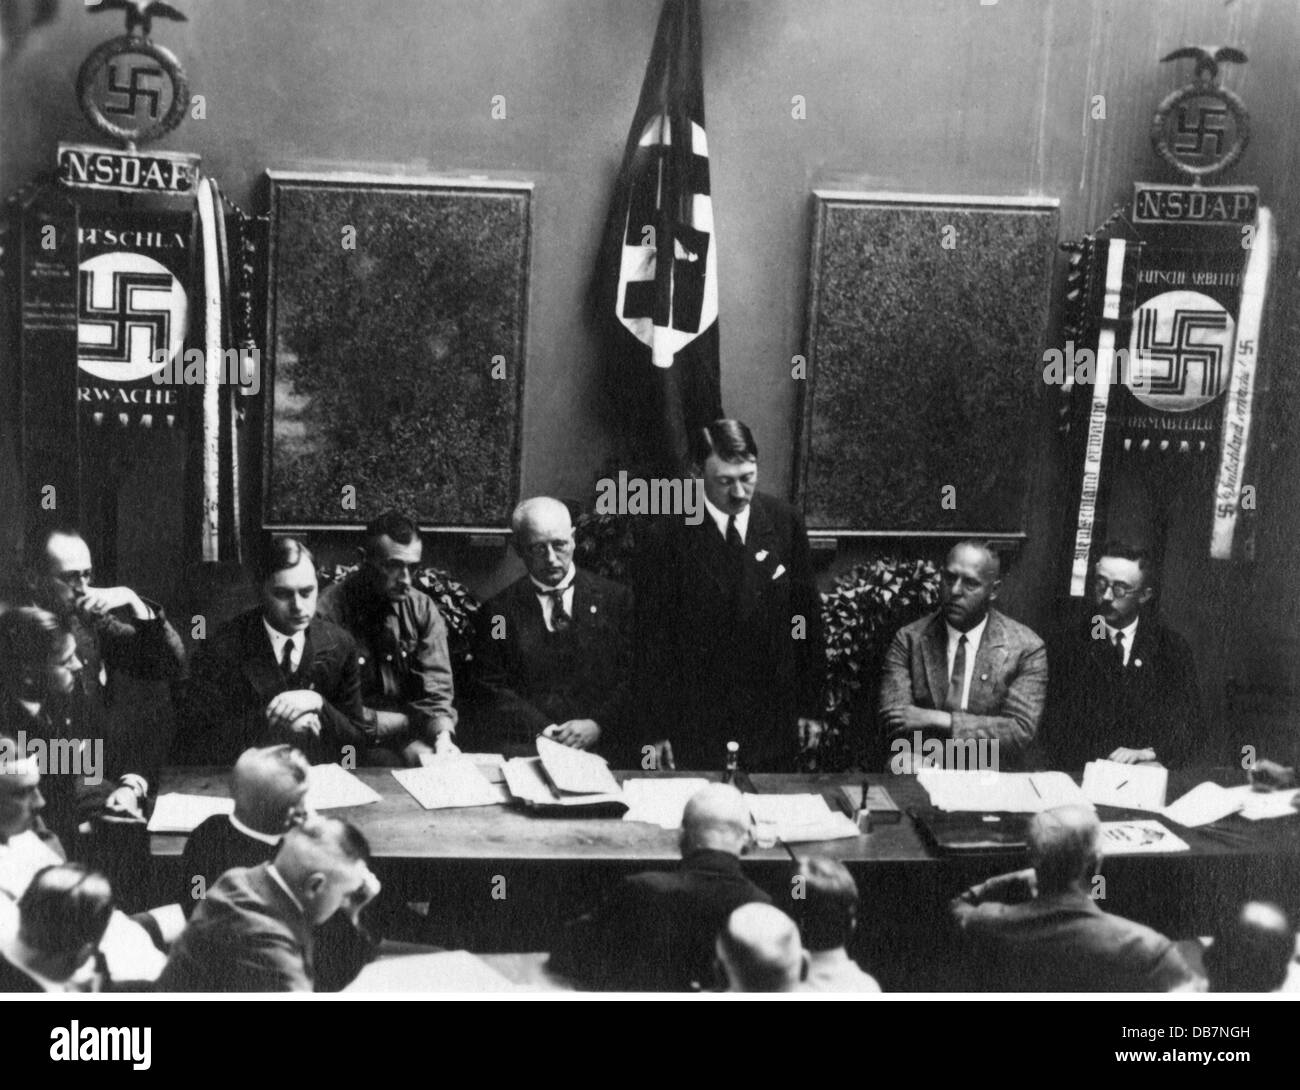 Nazism / National Socialism, politics, refoundation of the NSDAP, from left: Alfred Rosenberg, Walter Buch, Franz Xaver Schwarz, Adolf Hitler, Gregor Strasser, Heinrich Himmler, Party Headquarters, Schellingstrasse, Munich, 1925, Additional-Rights-Clearences-Not Available Stock Photo